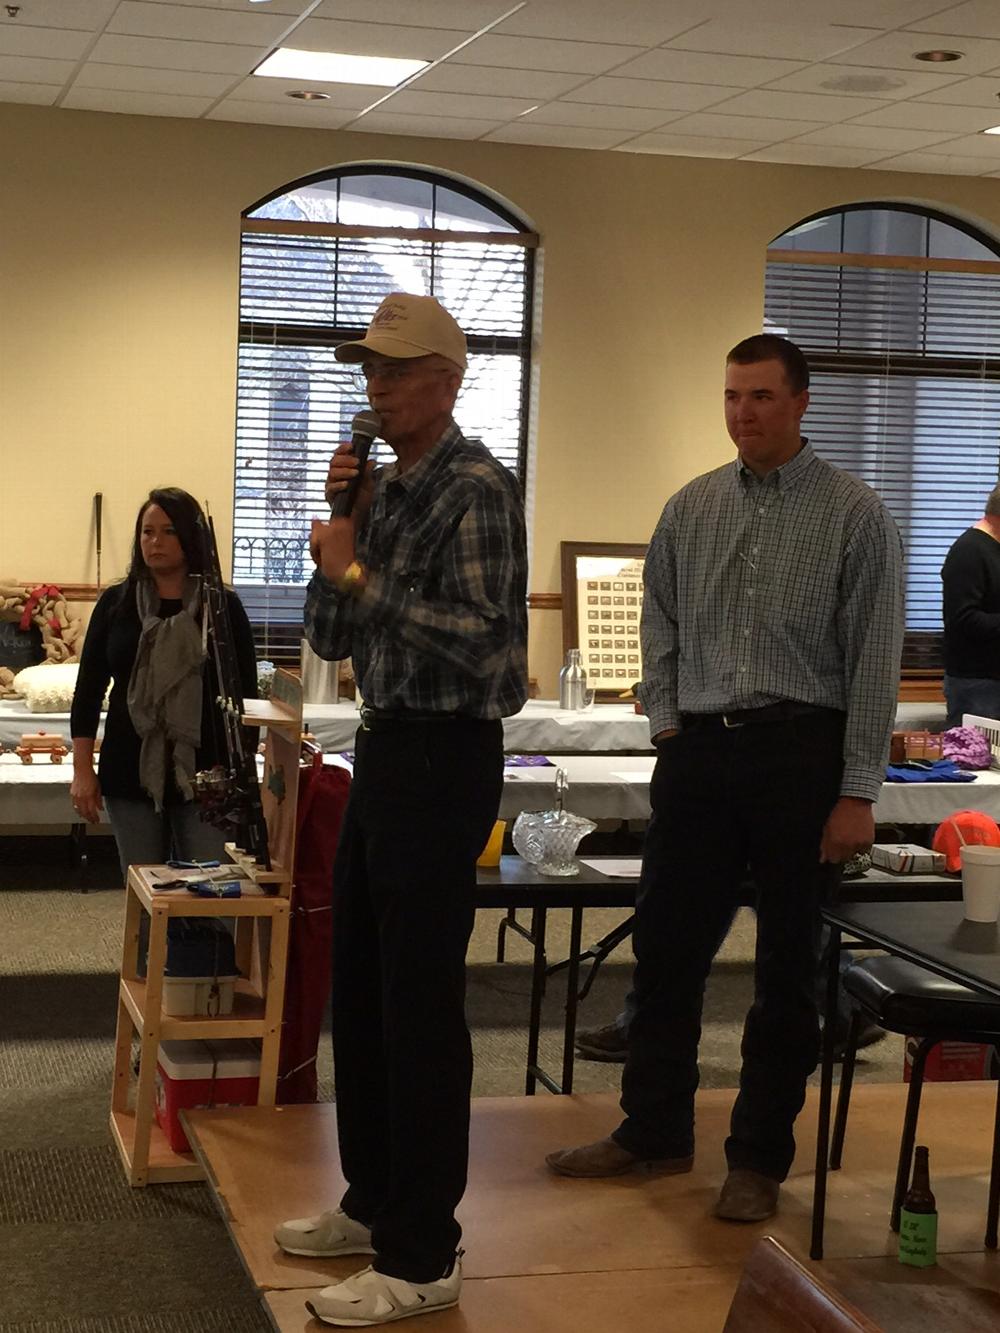 Kids Zoo Auction March 2015  Kami McClendon, Auctioneers Charlie Zink, PER and Adam Cummings, Tiler.  Over $15,000 was raised for the youth.  Thanks Clinton Elks!!!